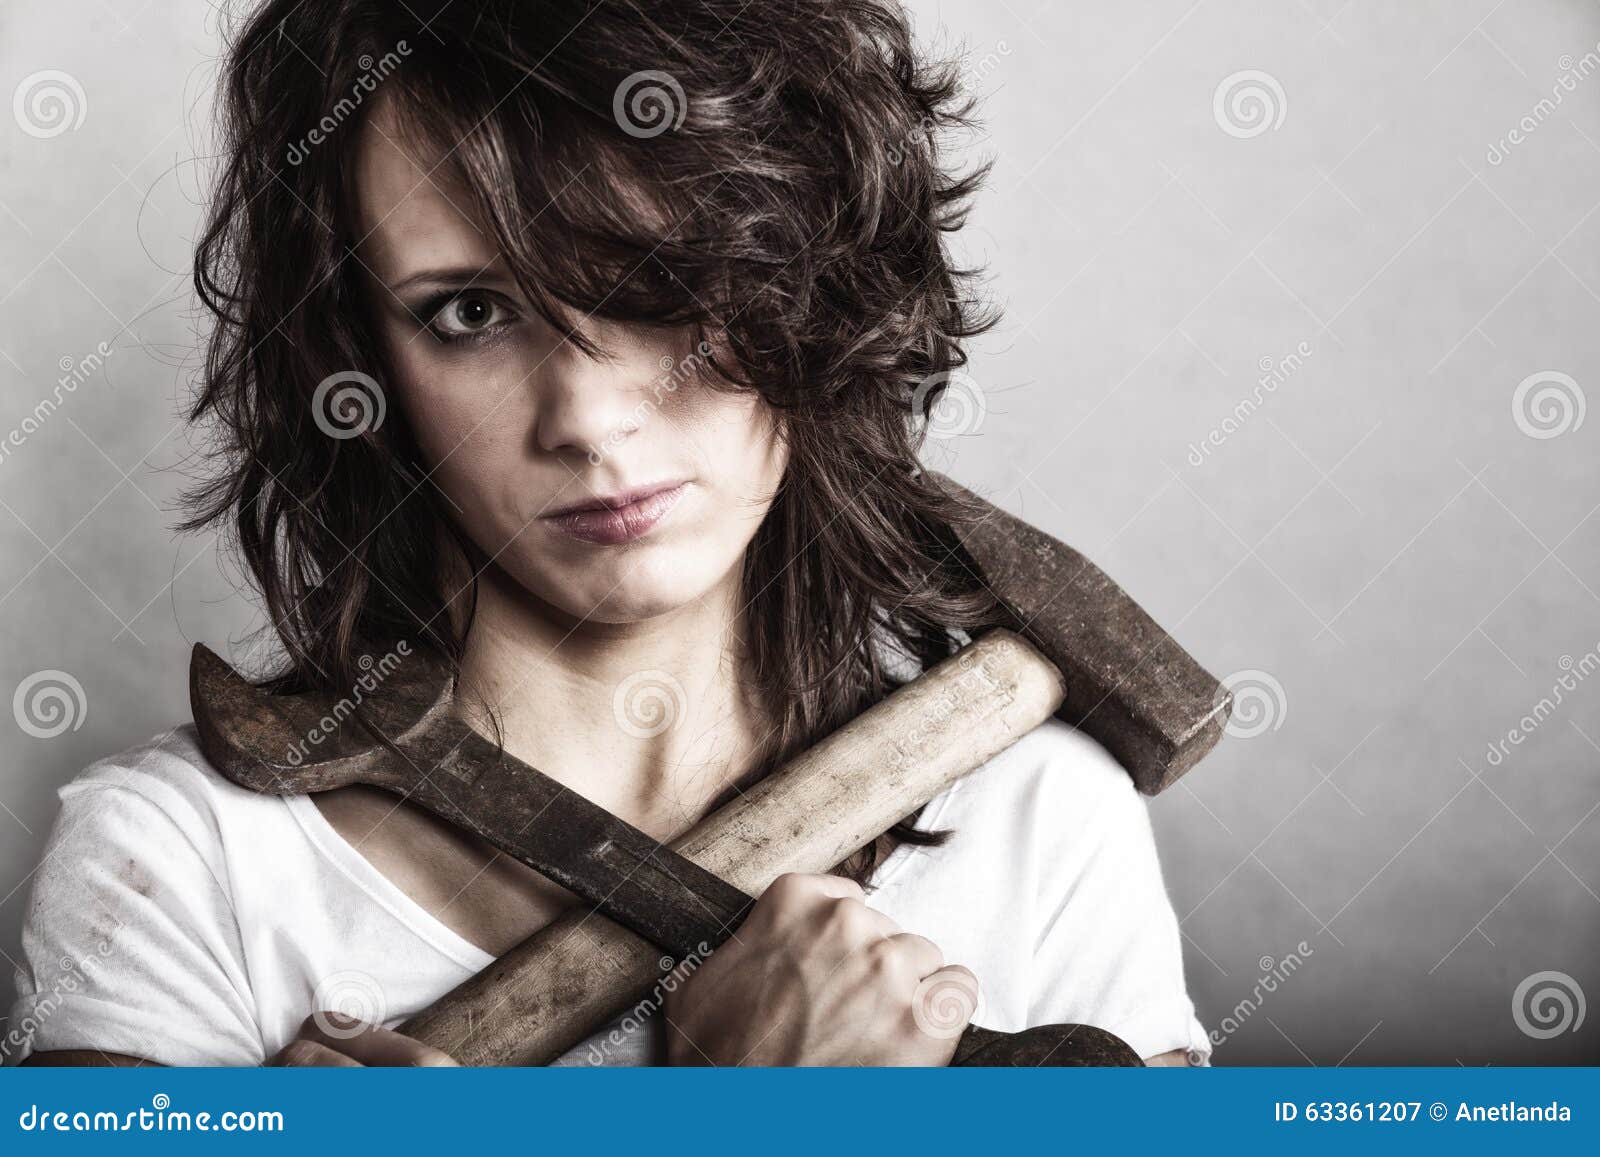 Girl Holding Hammer And Wrench Spanner Stock Image Image Of Carpenter